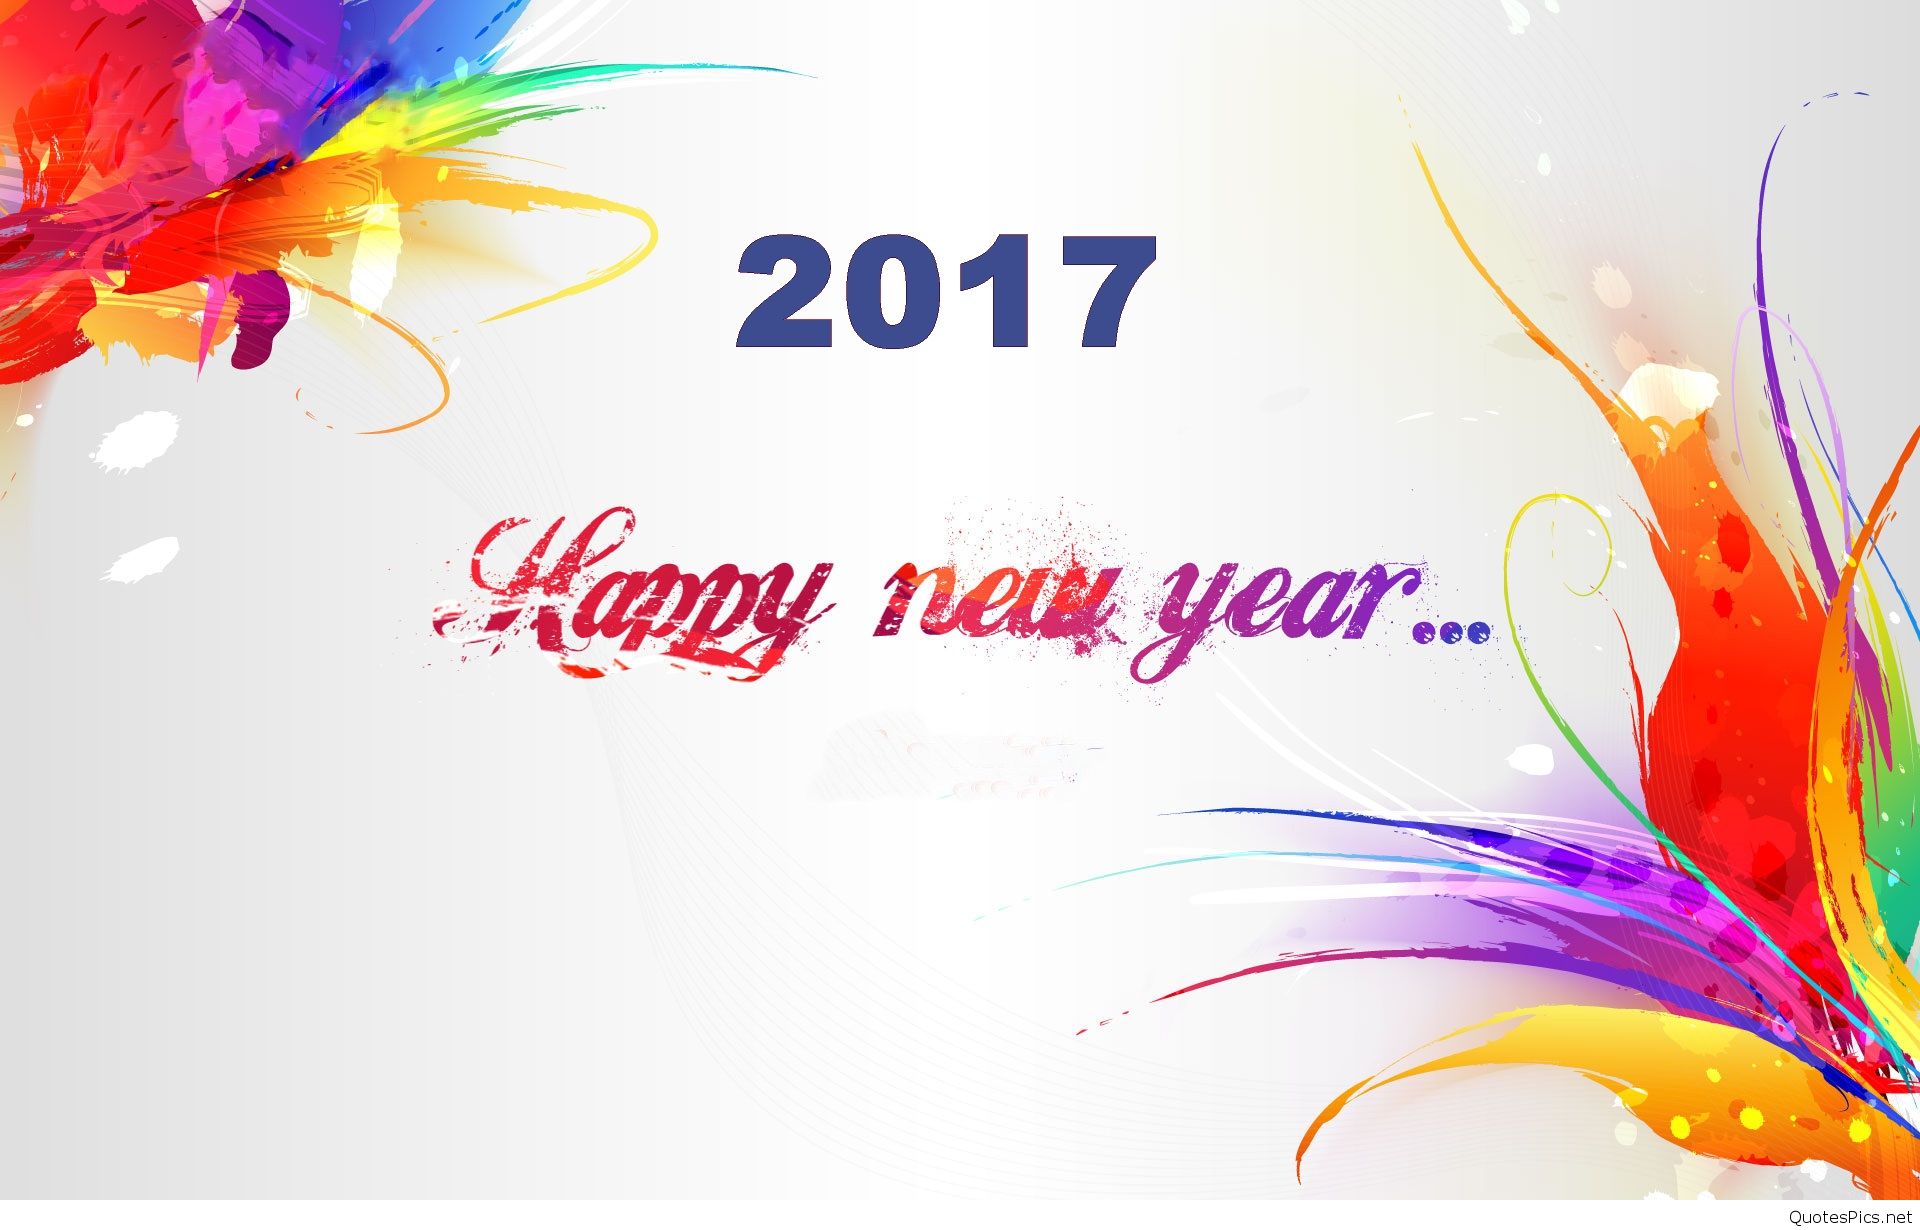 Happy New Year 2017 Wishes - Happy New Year Hd , HD Wallpaper & Backgrounds